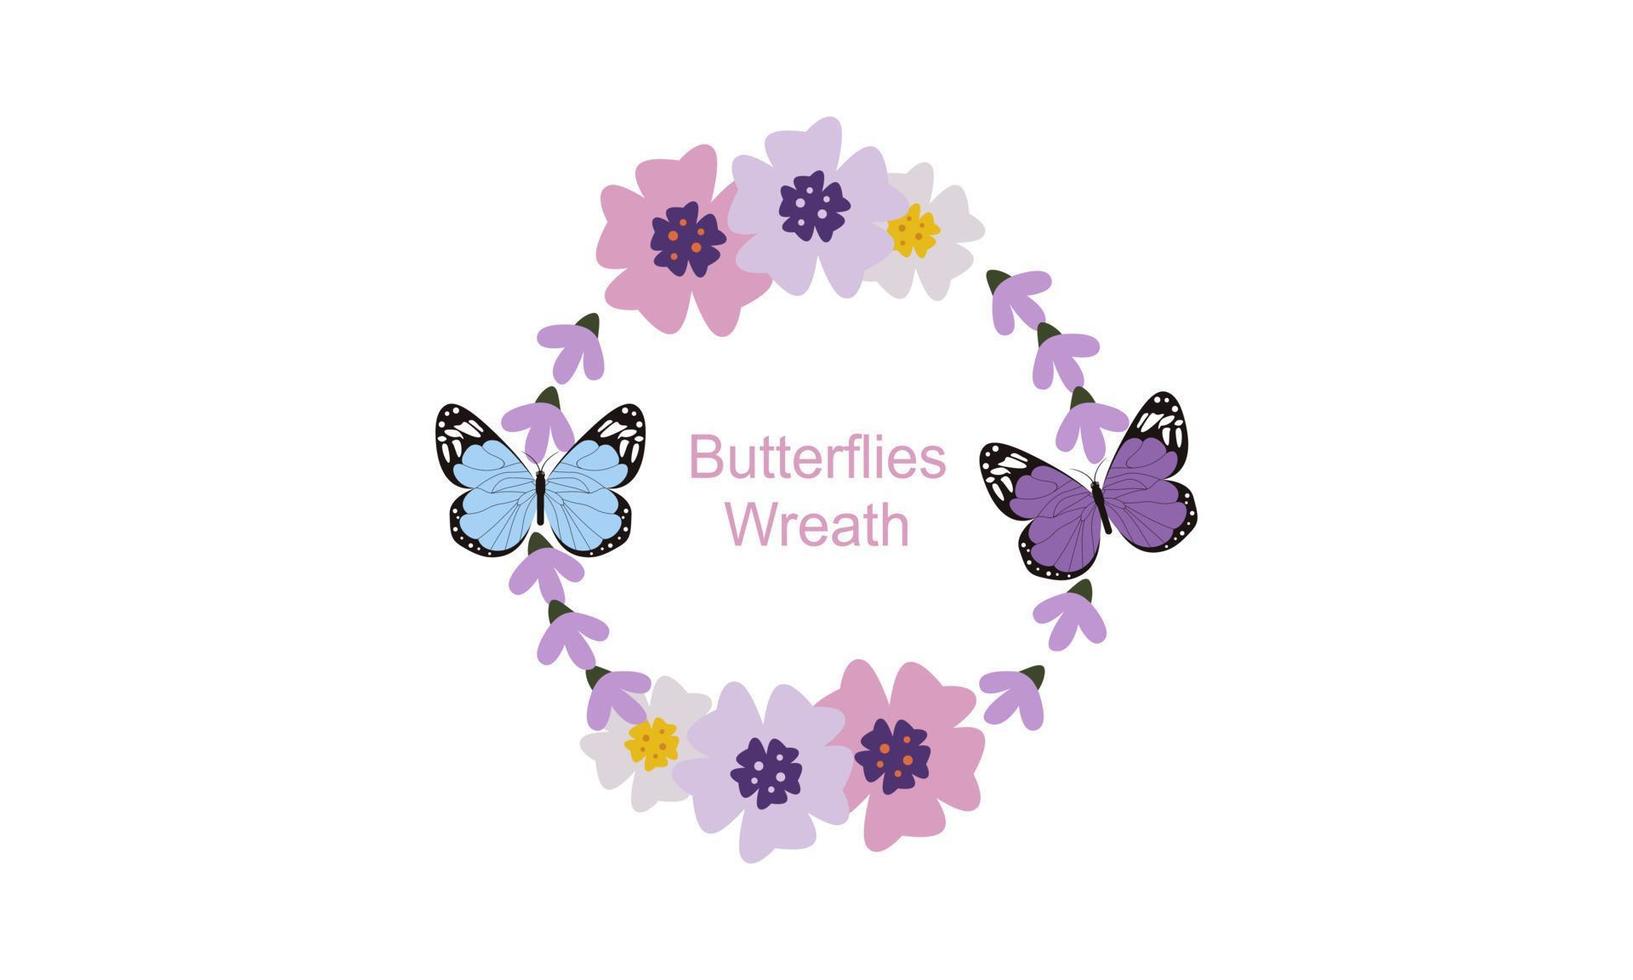 Wreath template and butterfly logo in watercolor style vector